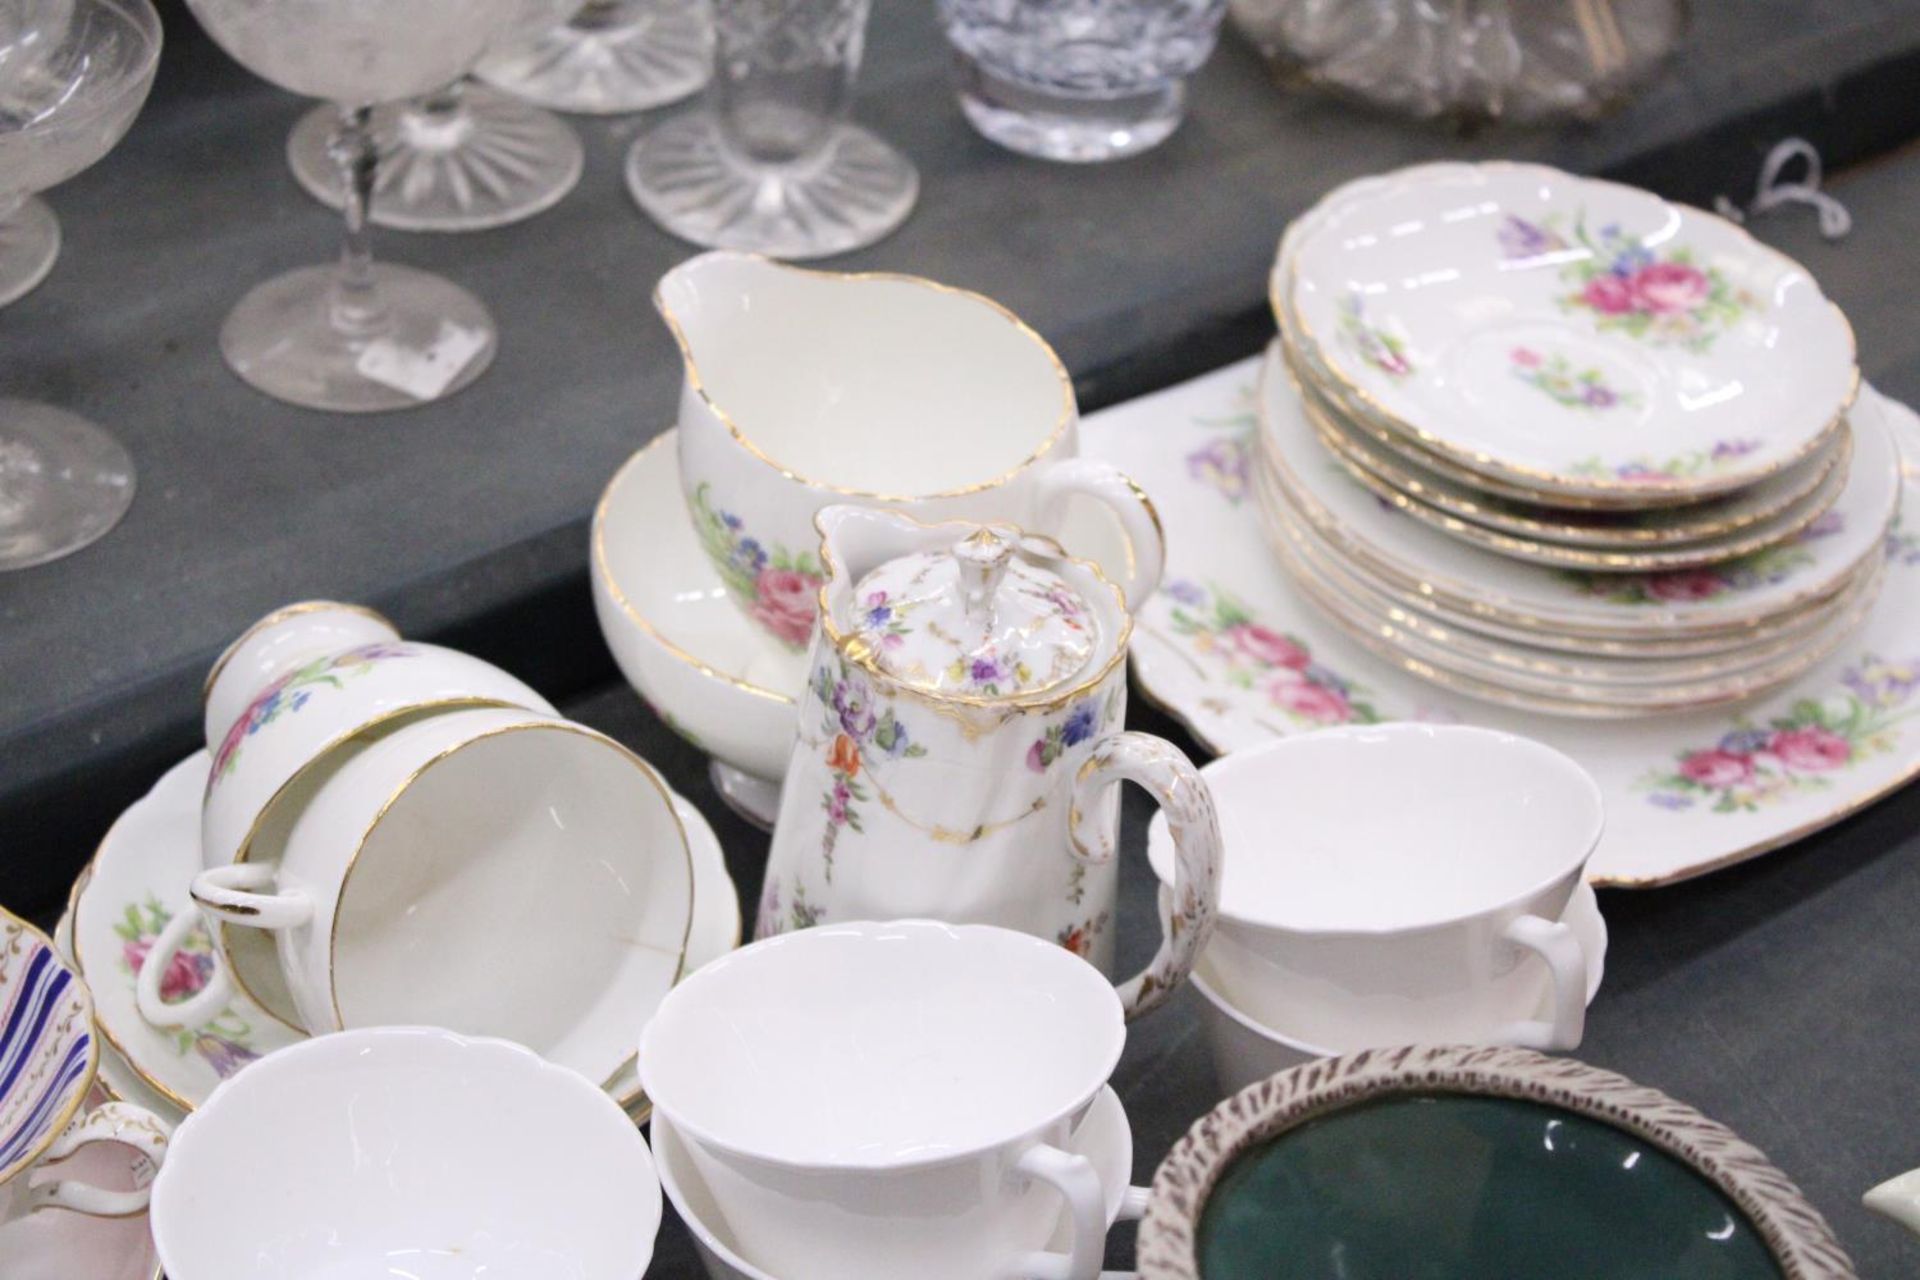 A FOLEY CHINA PART TEASET TO INCLUDE A CAKE PLATE, A CREAM JUG, SUGAR BOWL, CUPS, SAUCERS AND SIDE - Bild 6 aus 6